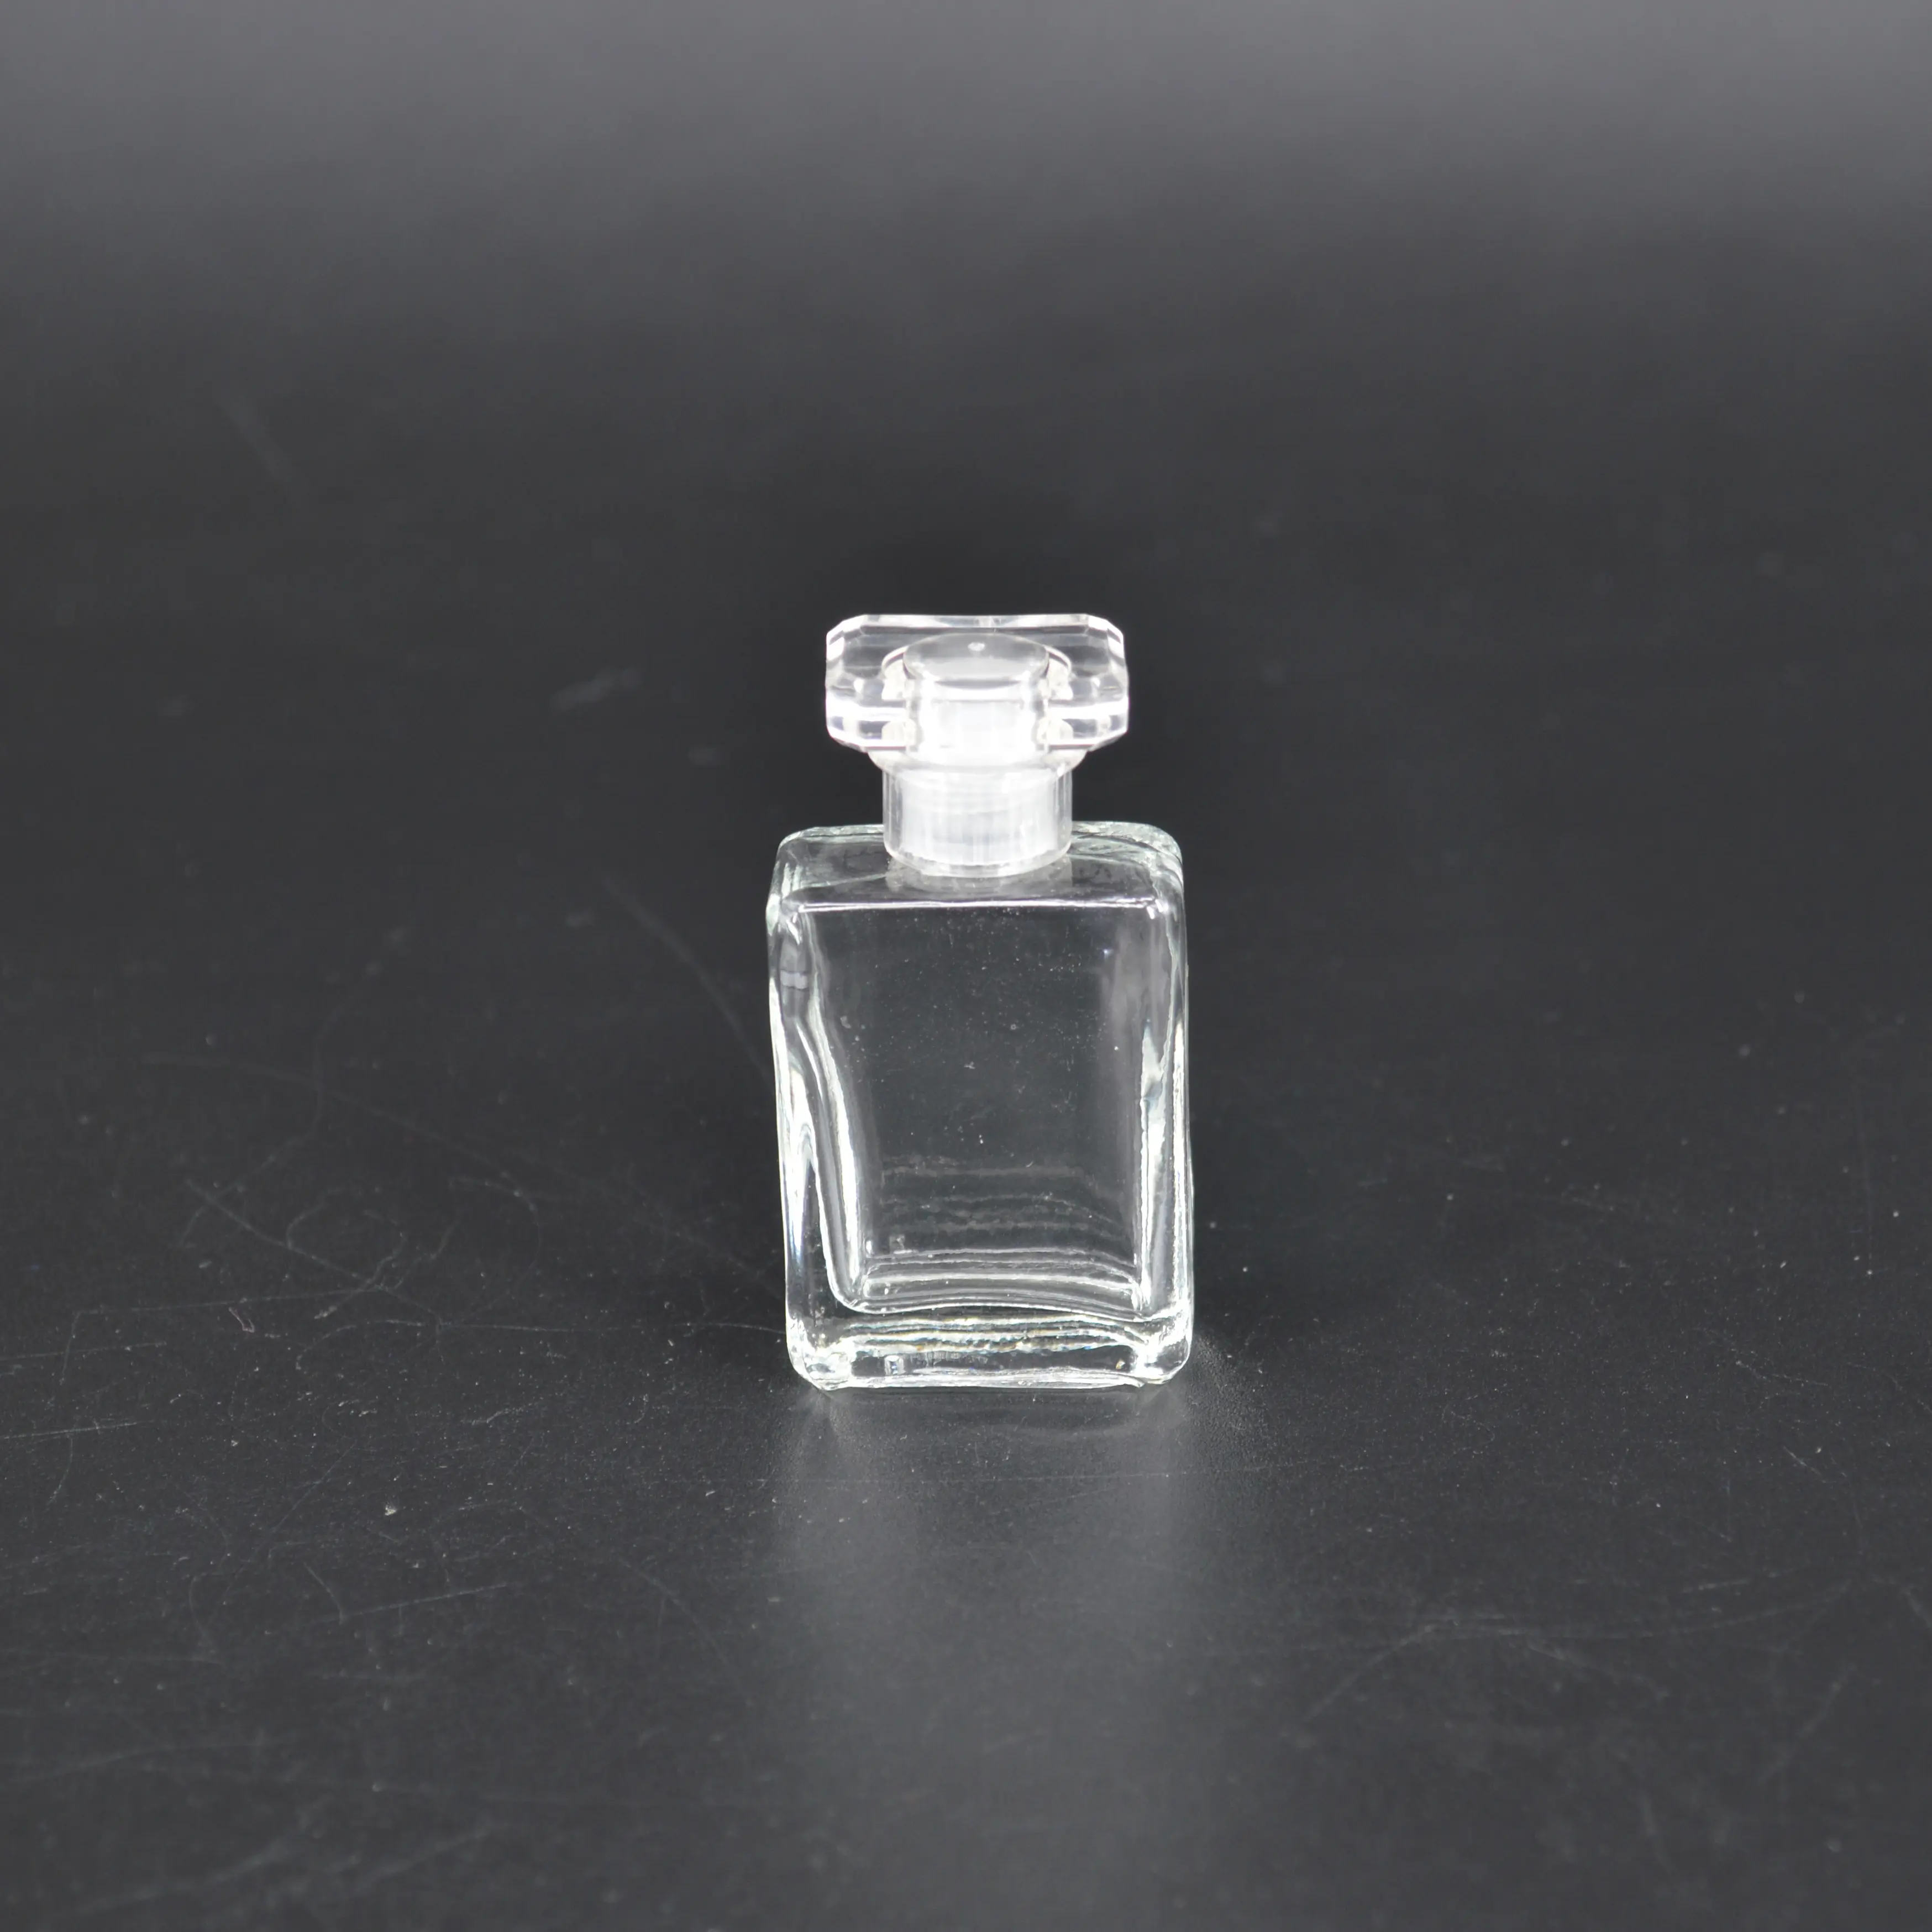 10ml square glass bottles with square lid for perfume or wind medicated oil or Toilet water